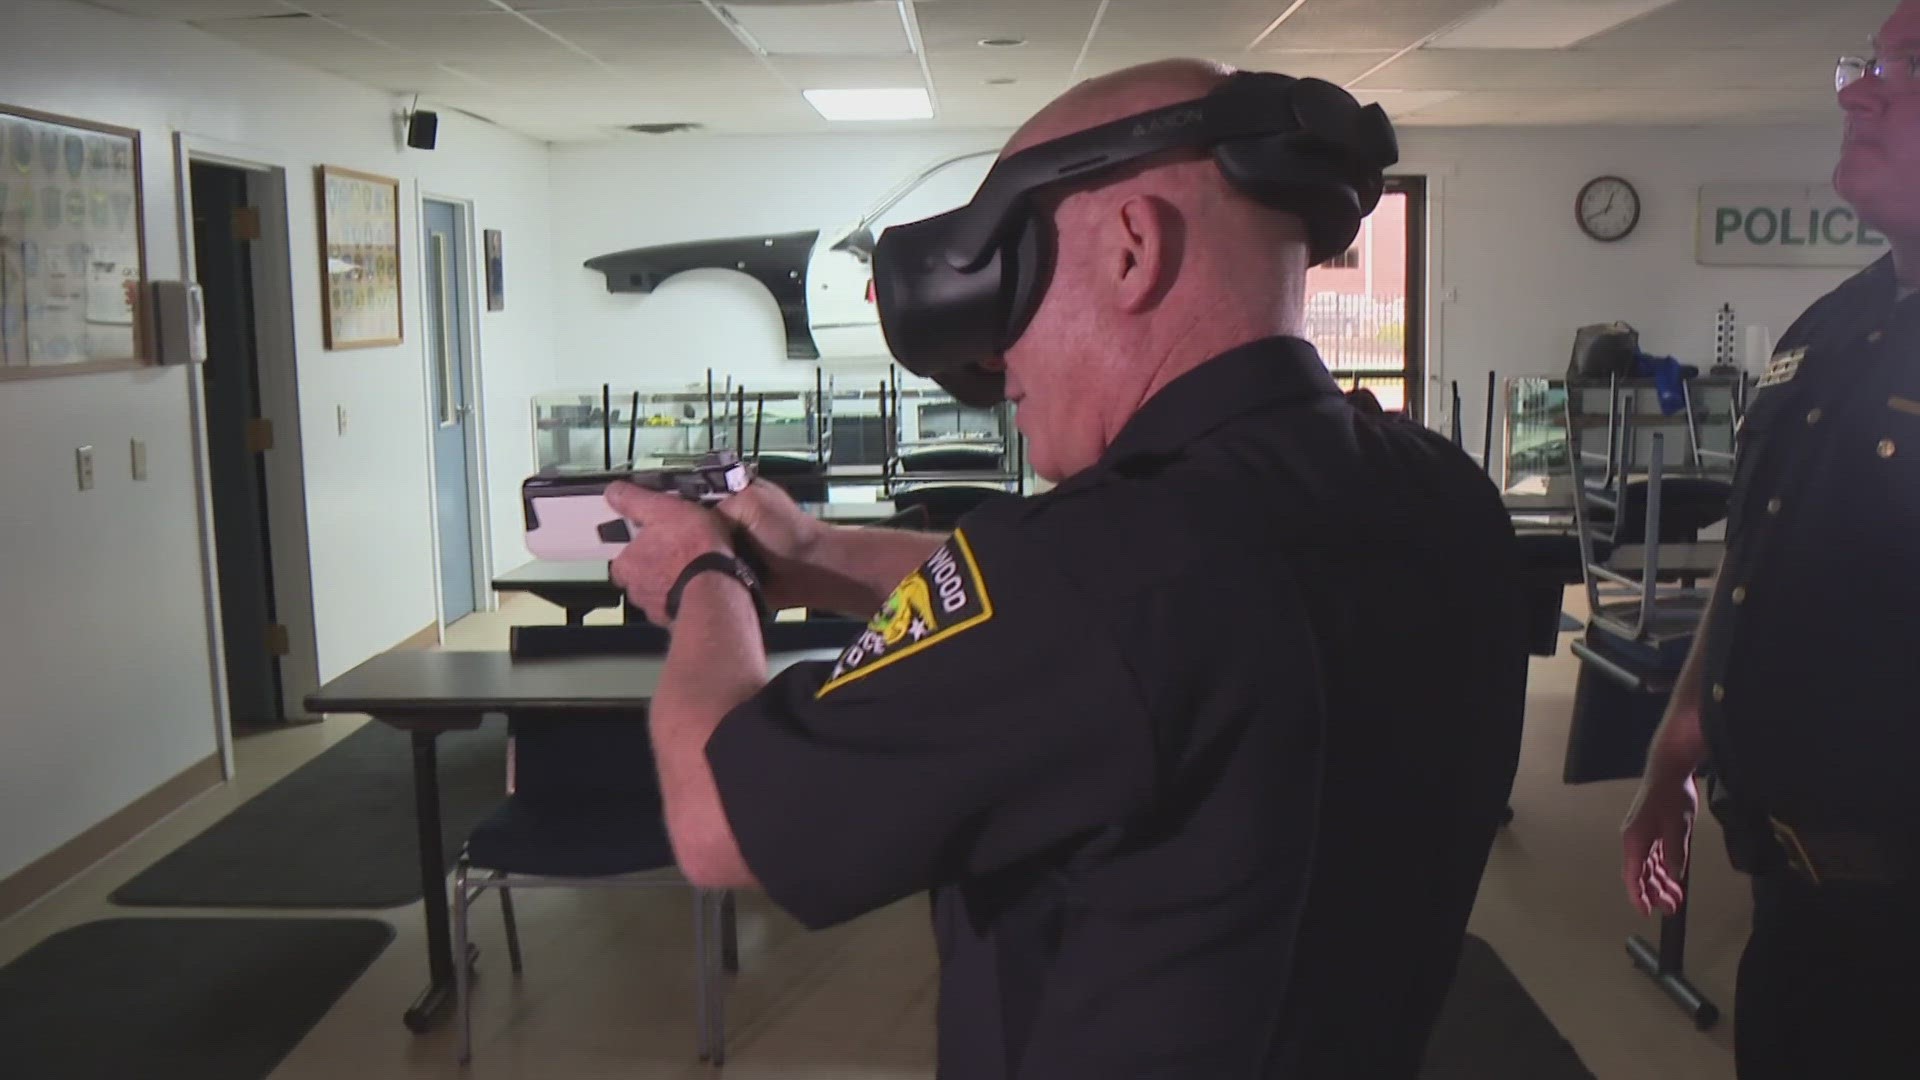 The department has obtained four VR headsets to create scenarios for a variety of training experiences.